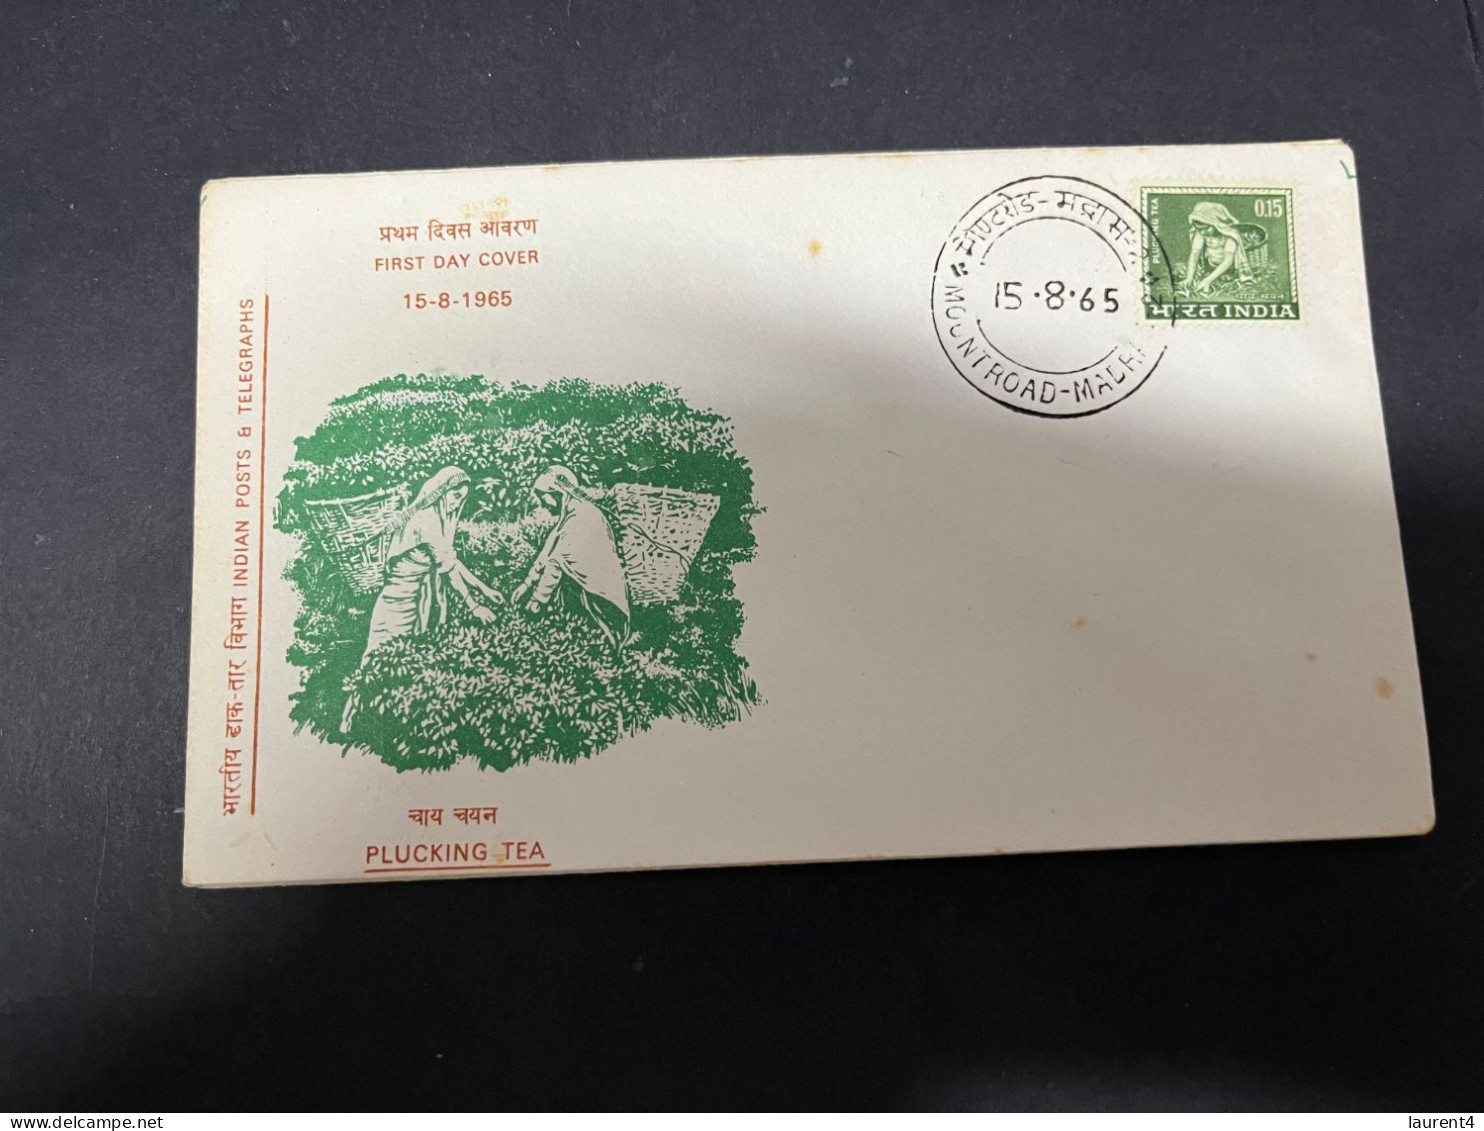 12-5-2024 (4 Z 49) INDIA FDC Cover - 1965 - Plucking Tea - FDC